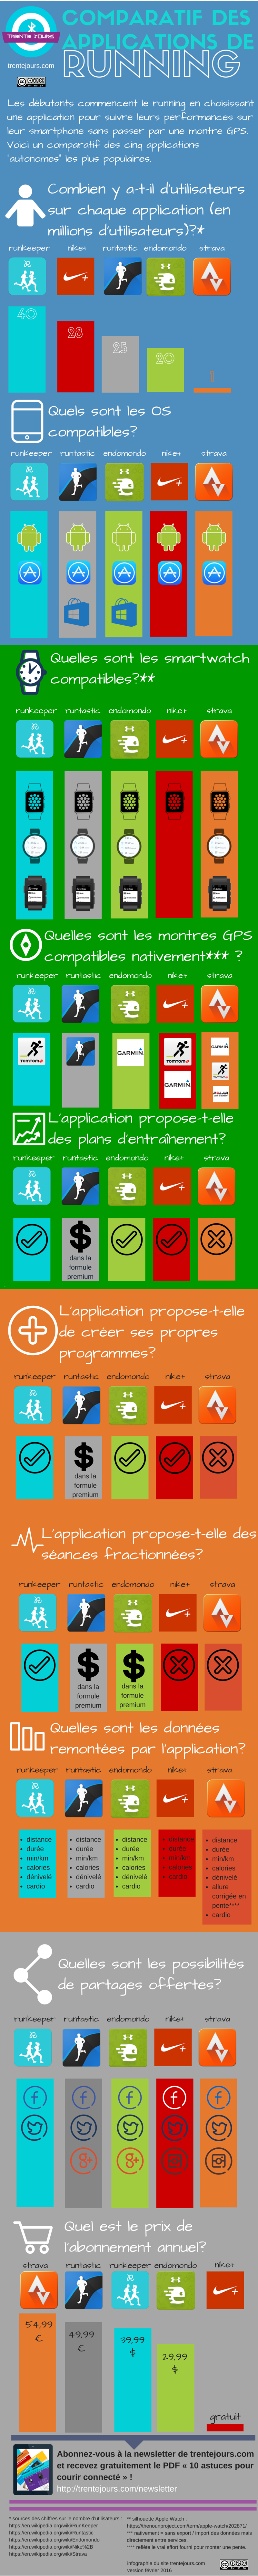 infographie-comparatif application running